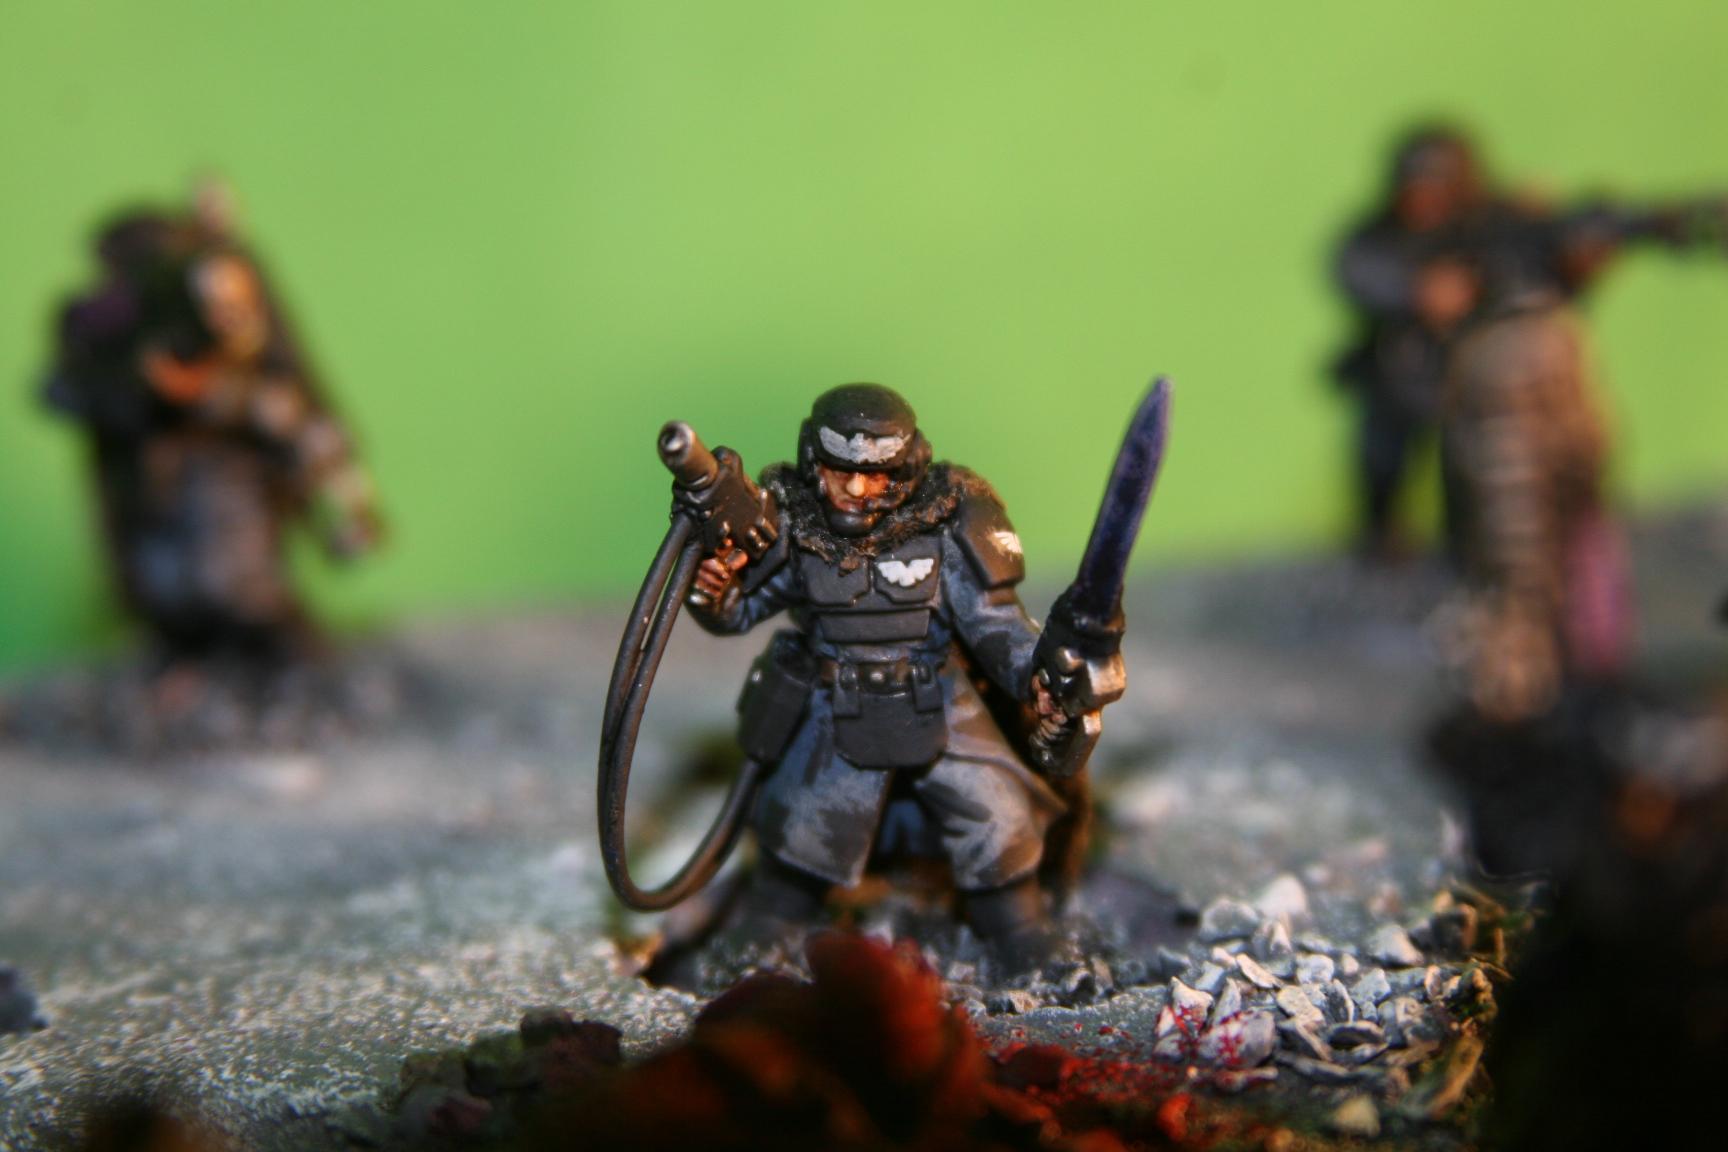 Cadians, Sgt. Mueller glancing down at the dead soldier